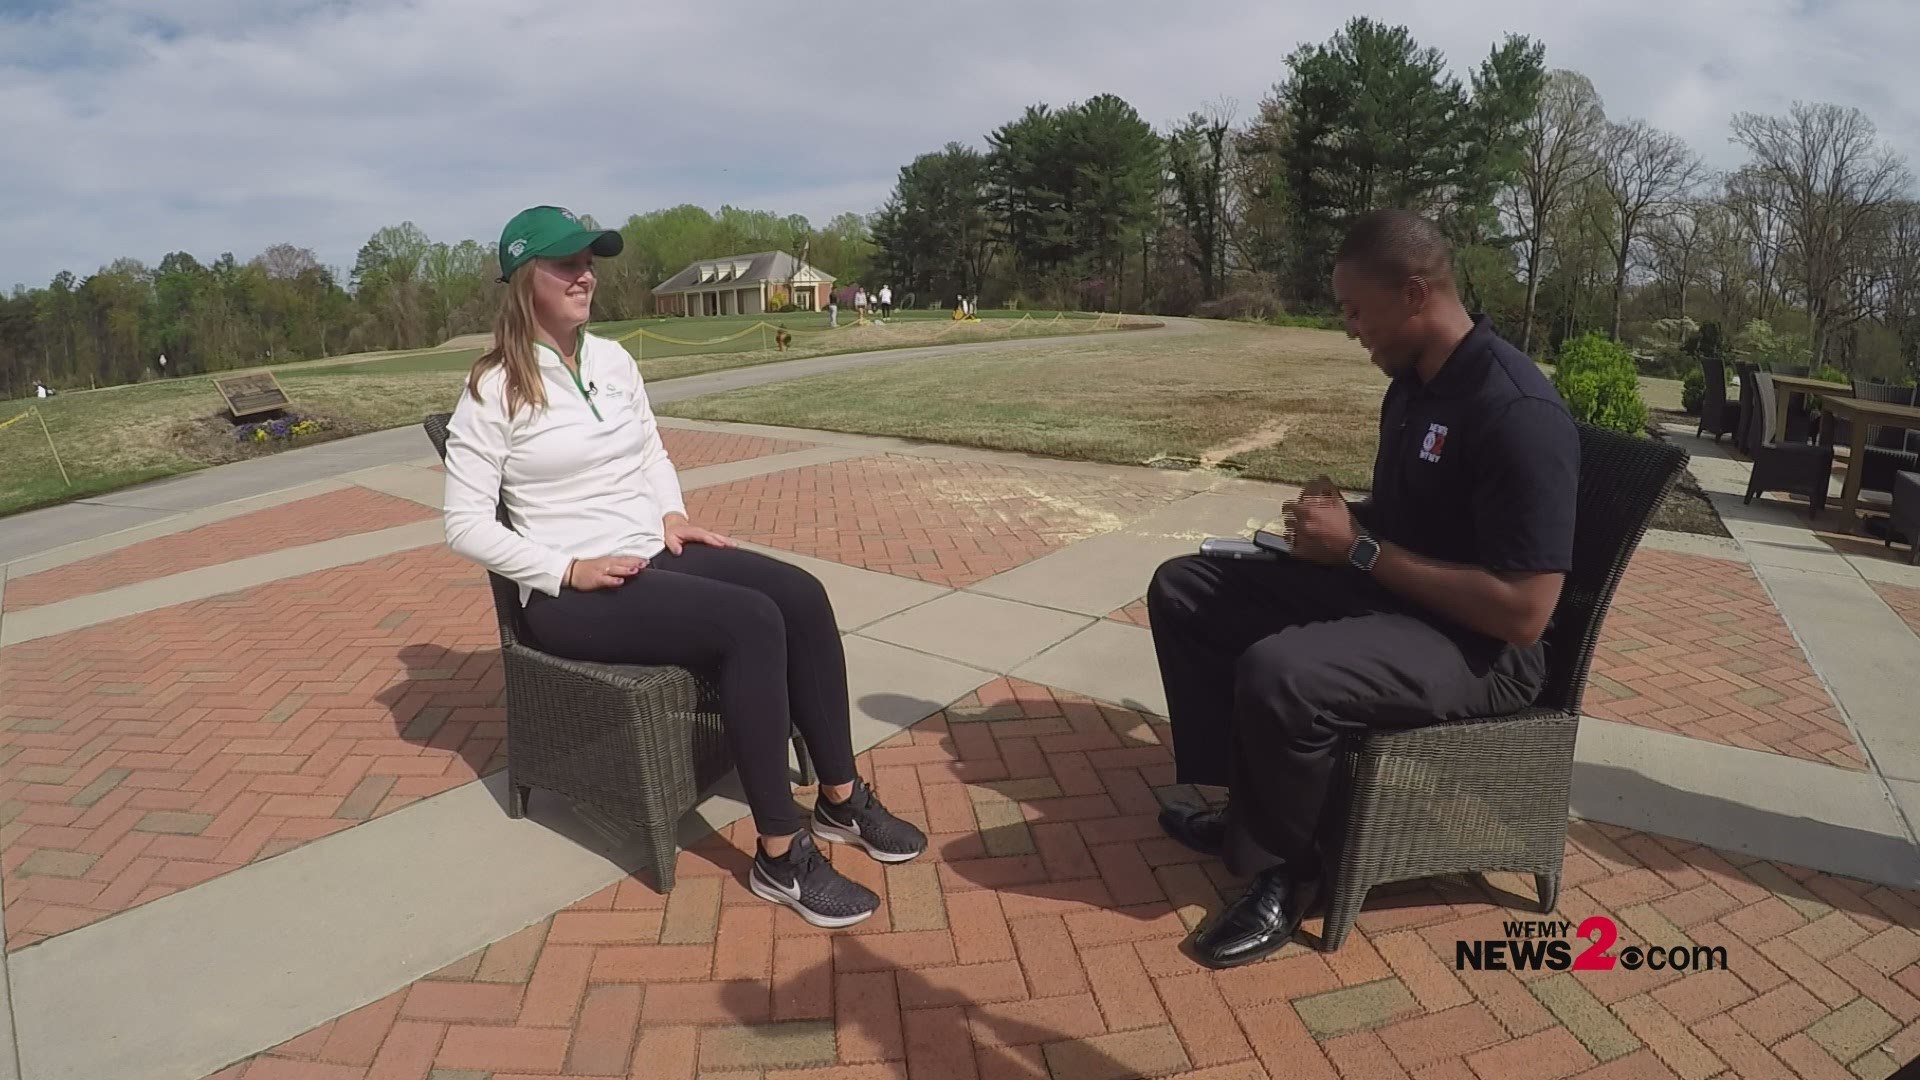 Wake Forest senior golfer and reigning NCAA national champion Jennifer Kupcho sat down with WFMY News 2's Patrick Wright for one minute of rapid-fire questions.